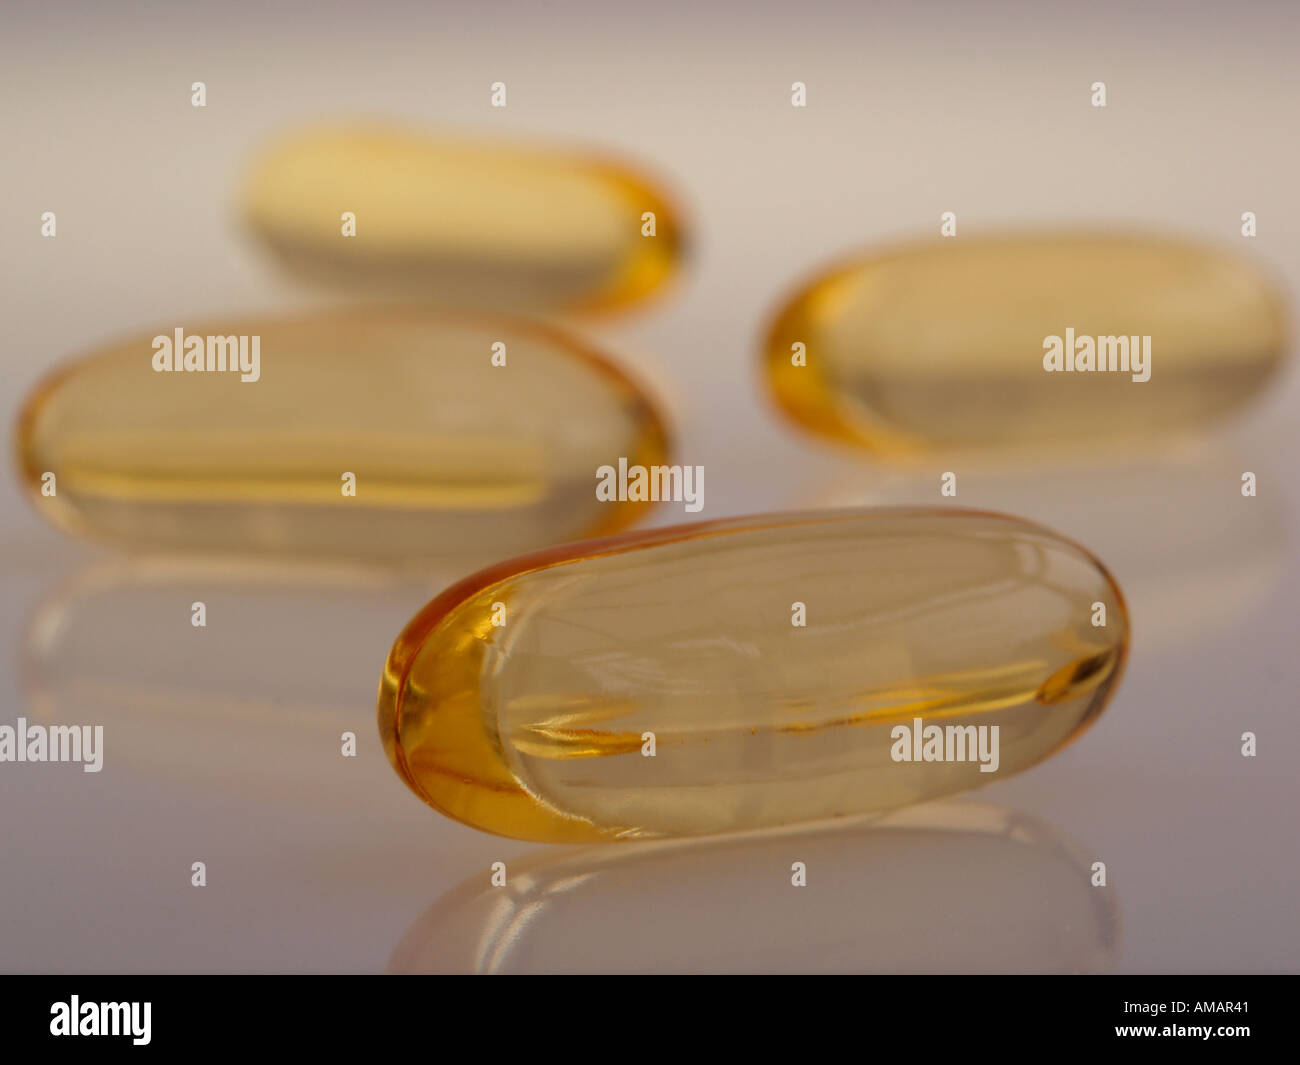 High Strength Cod Liver Oil Capsules Containing Omega 3 And